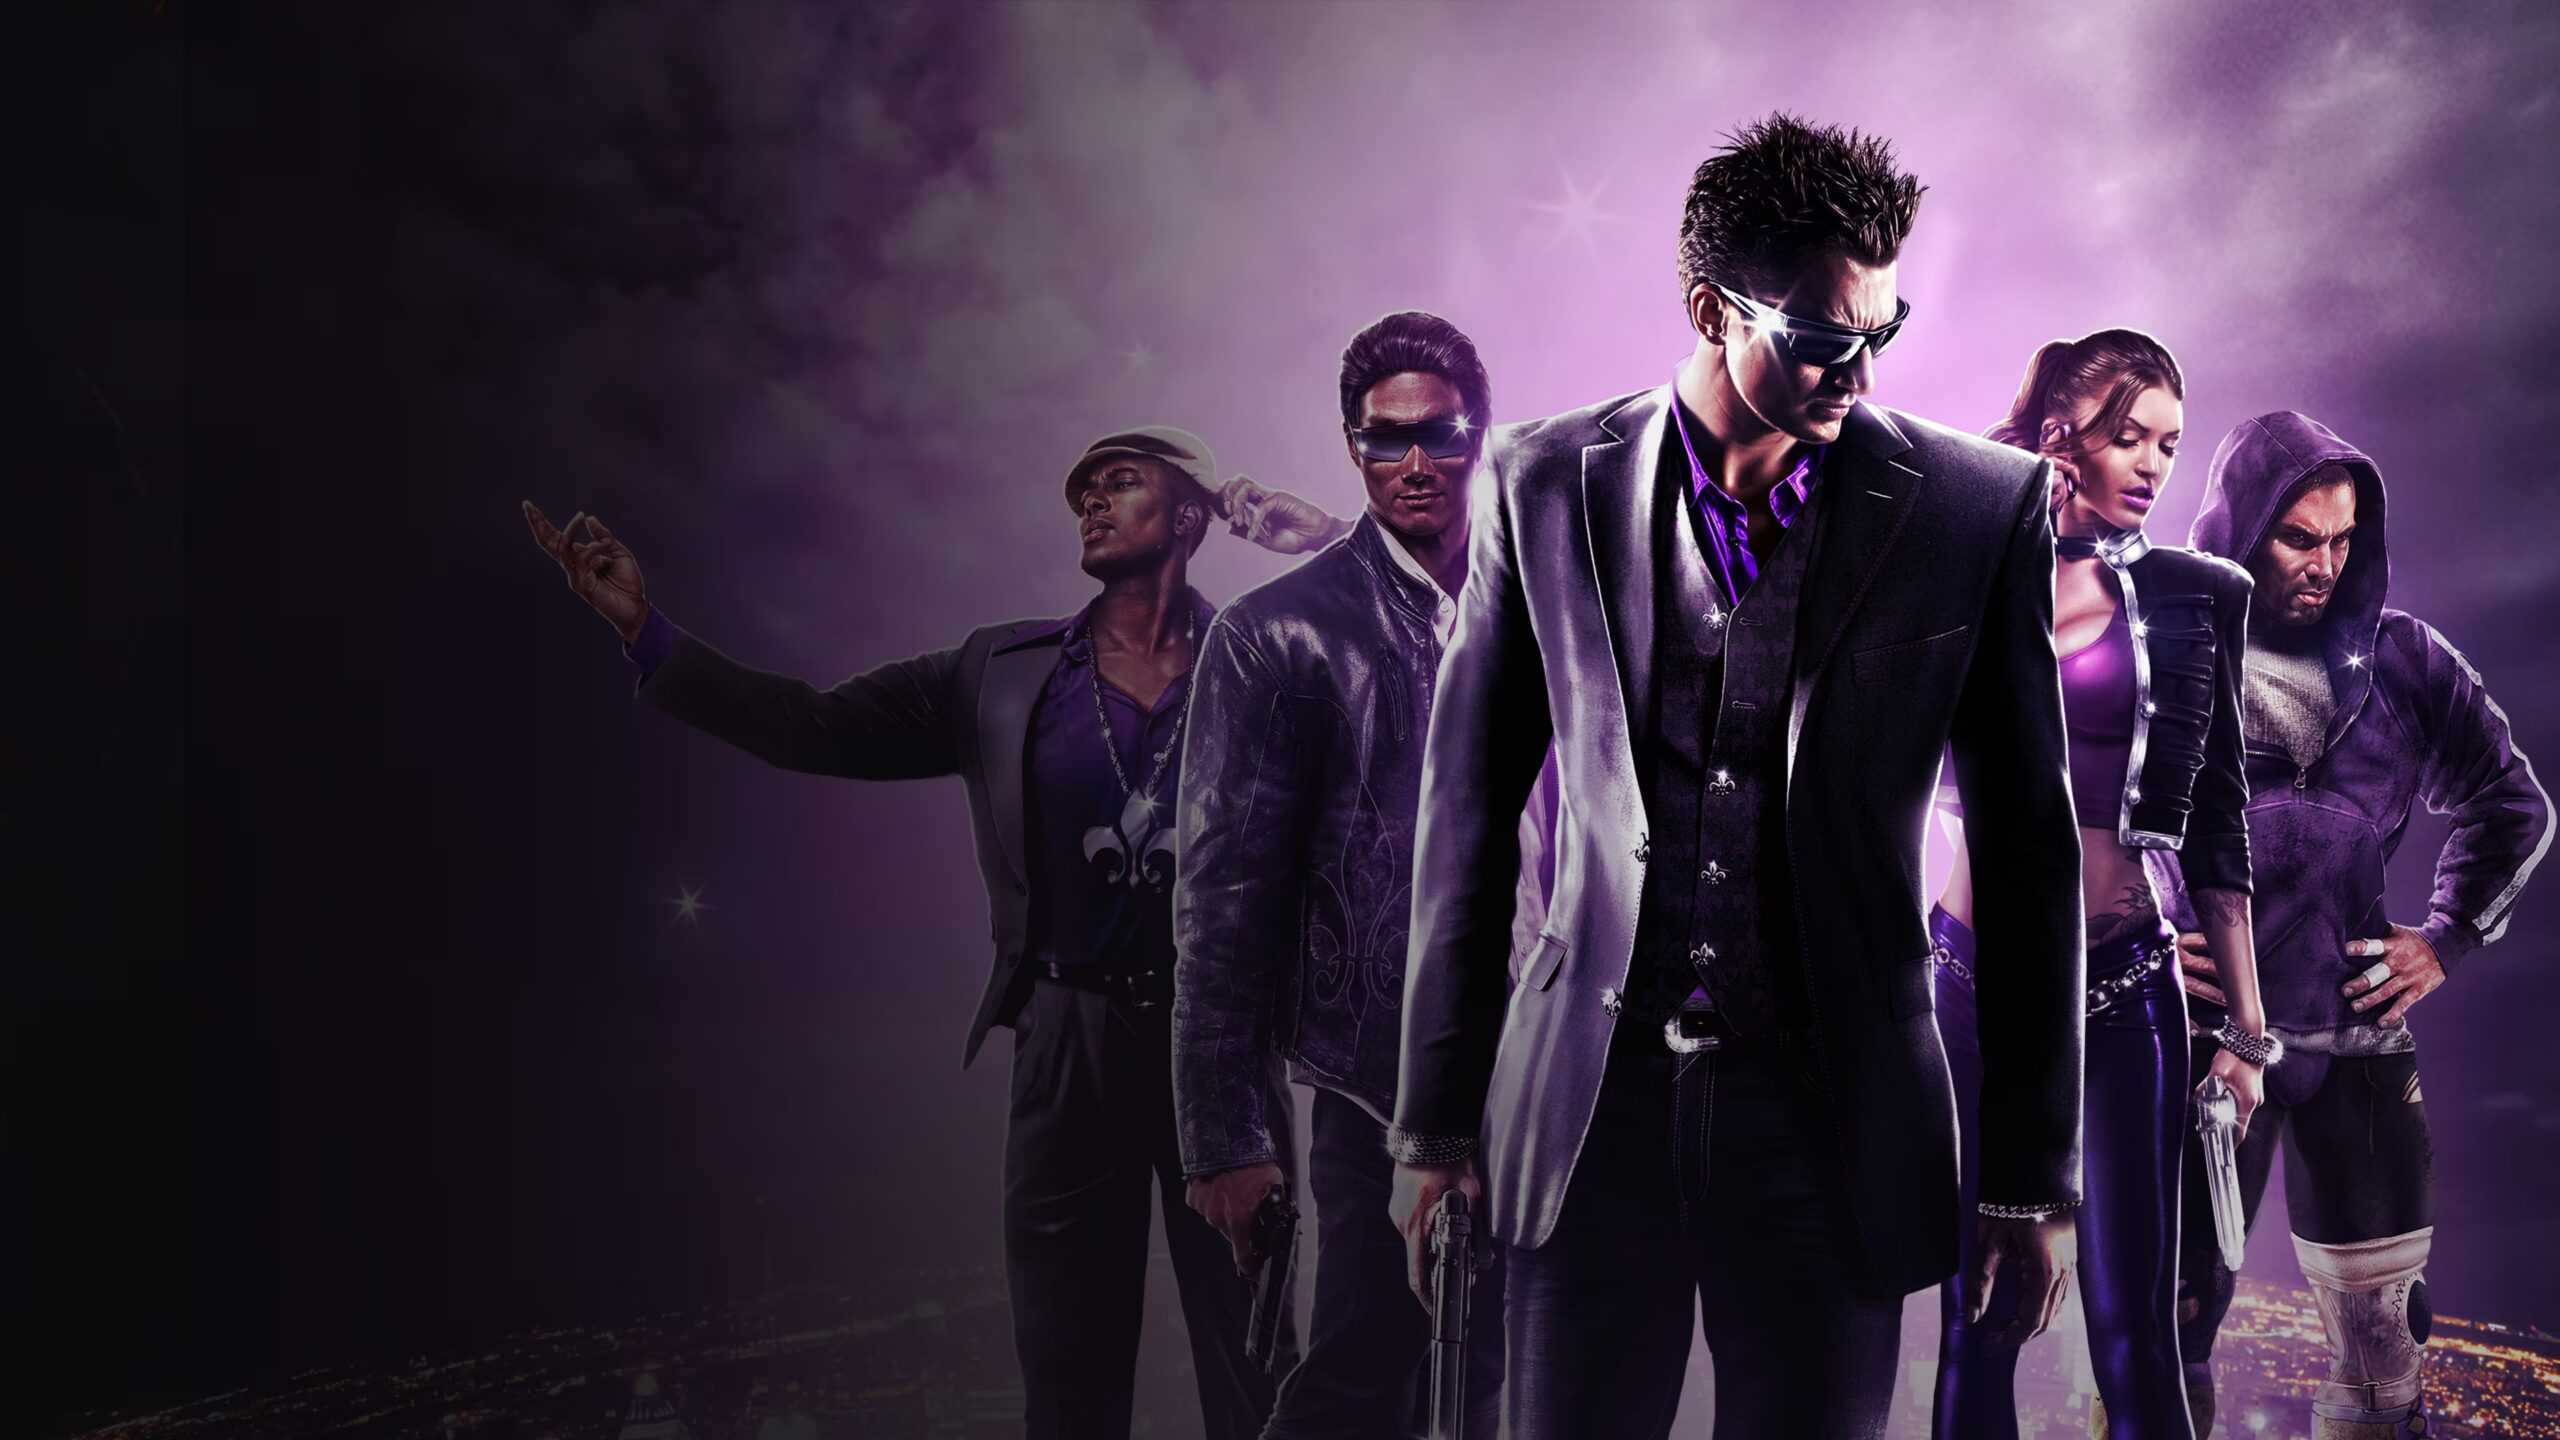 Saints Row: The Third Remastered - Everything We Know So Far! 